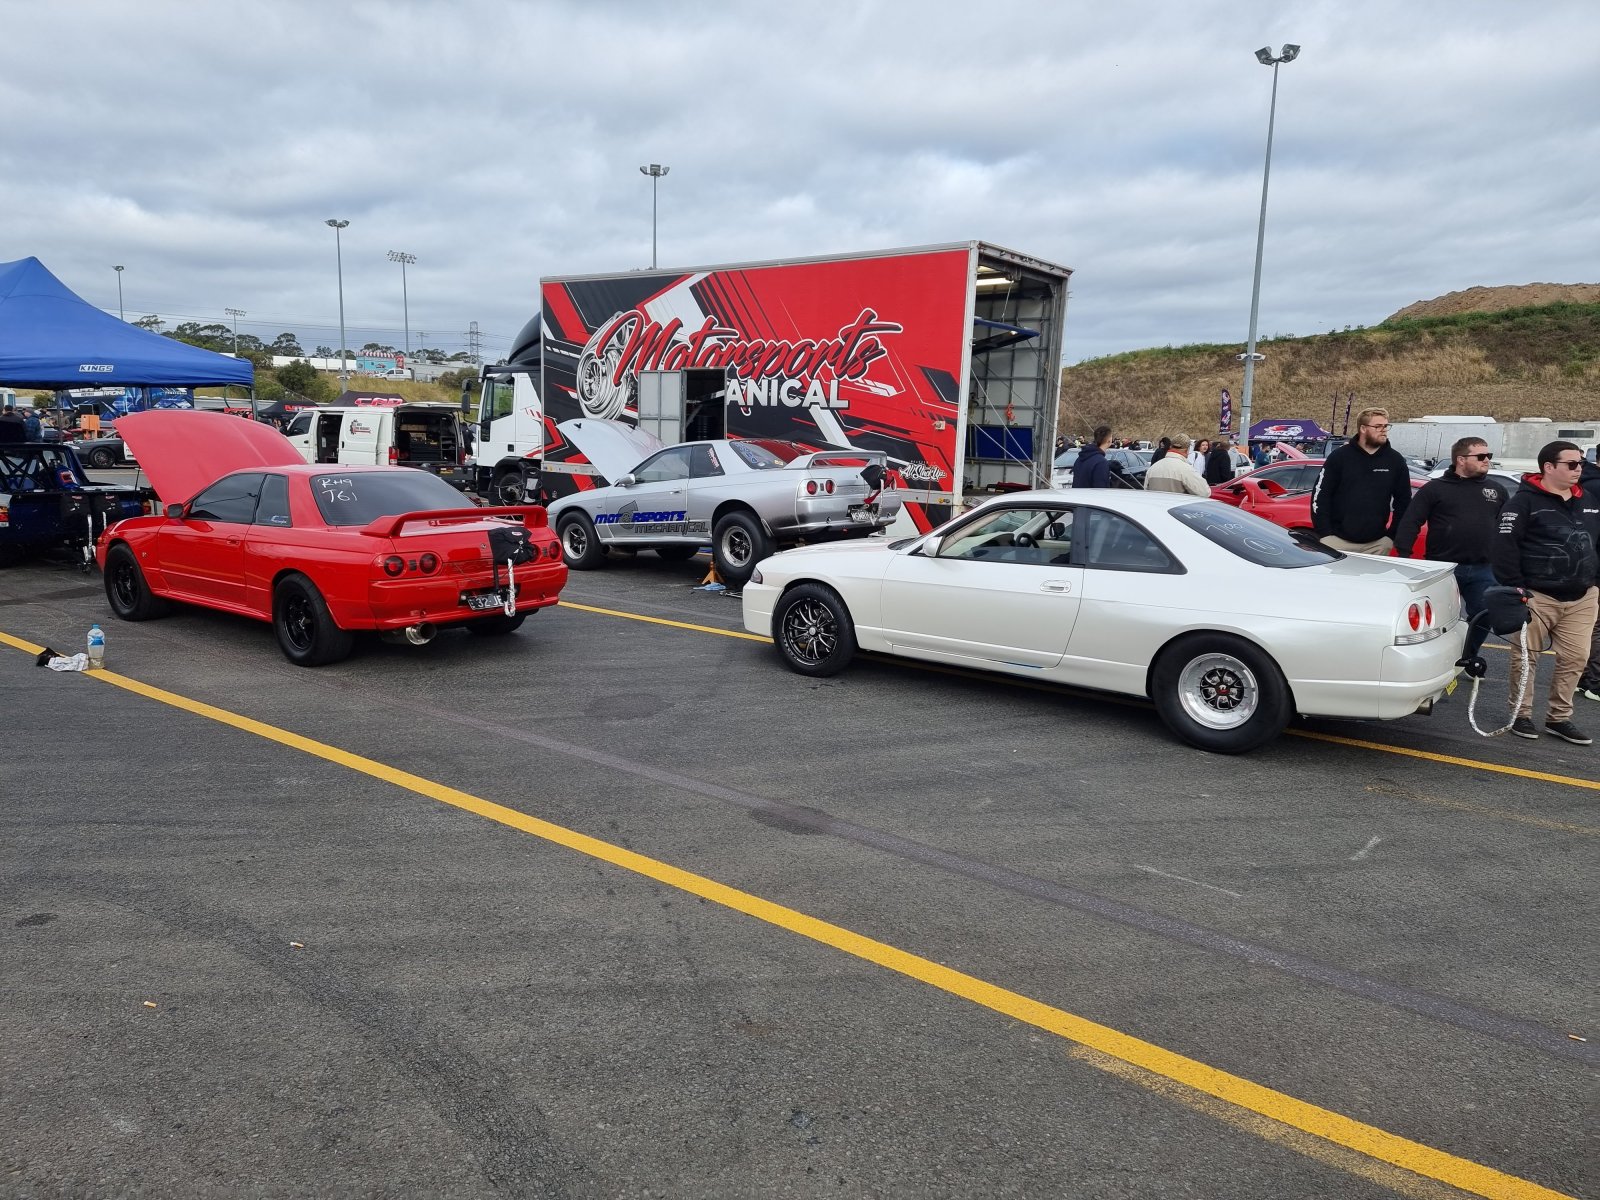 A collection of quick Nissan Skyline drag cars